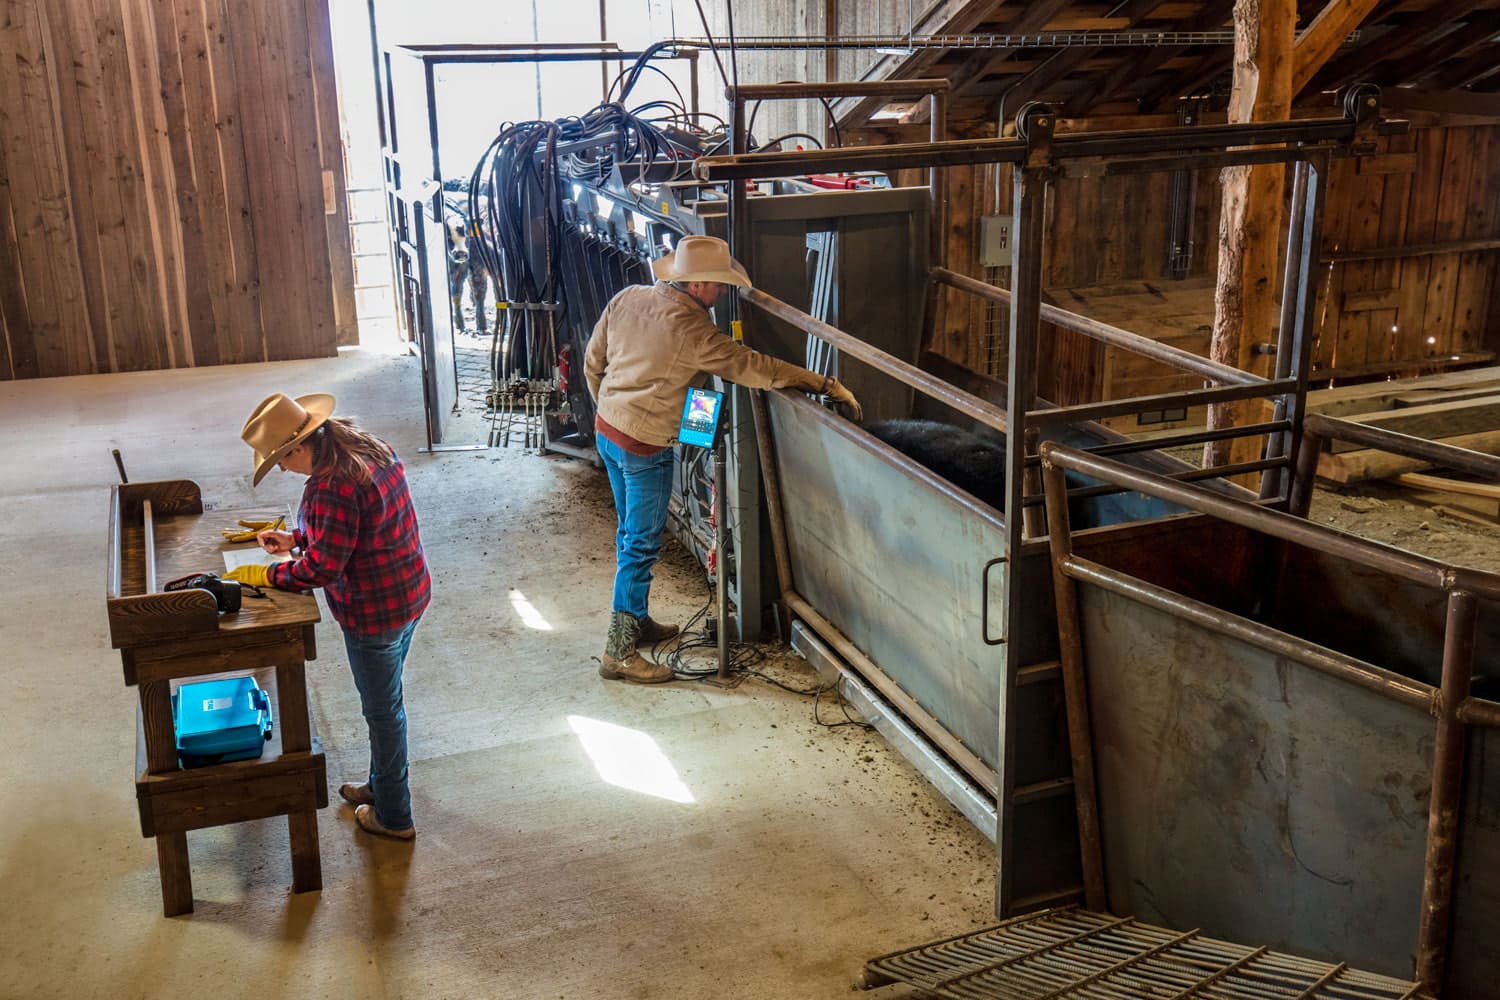 A cowboy and cowgirl work together to vaccinate cattle on a ranch near Big Timber, Montana.